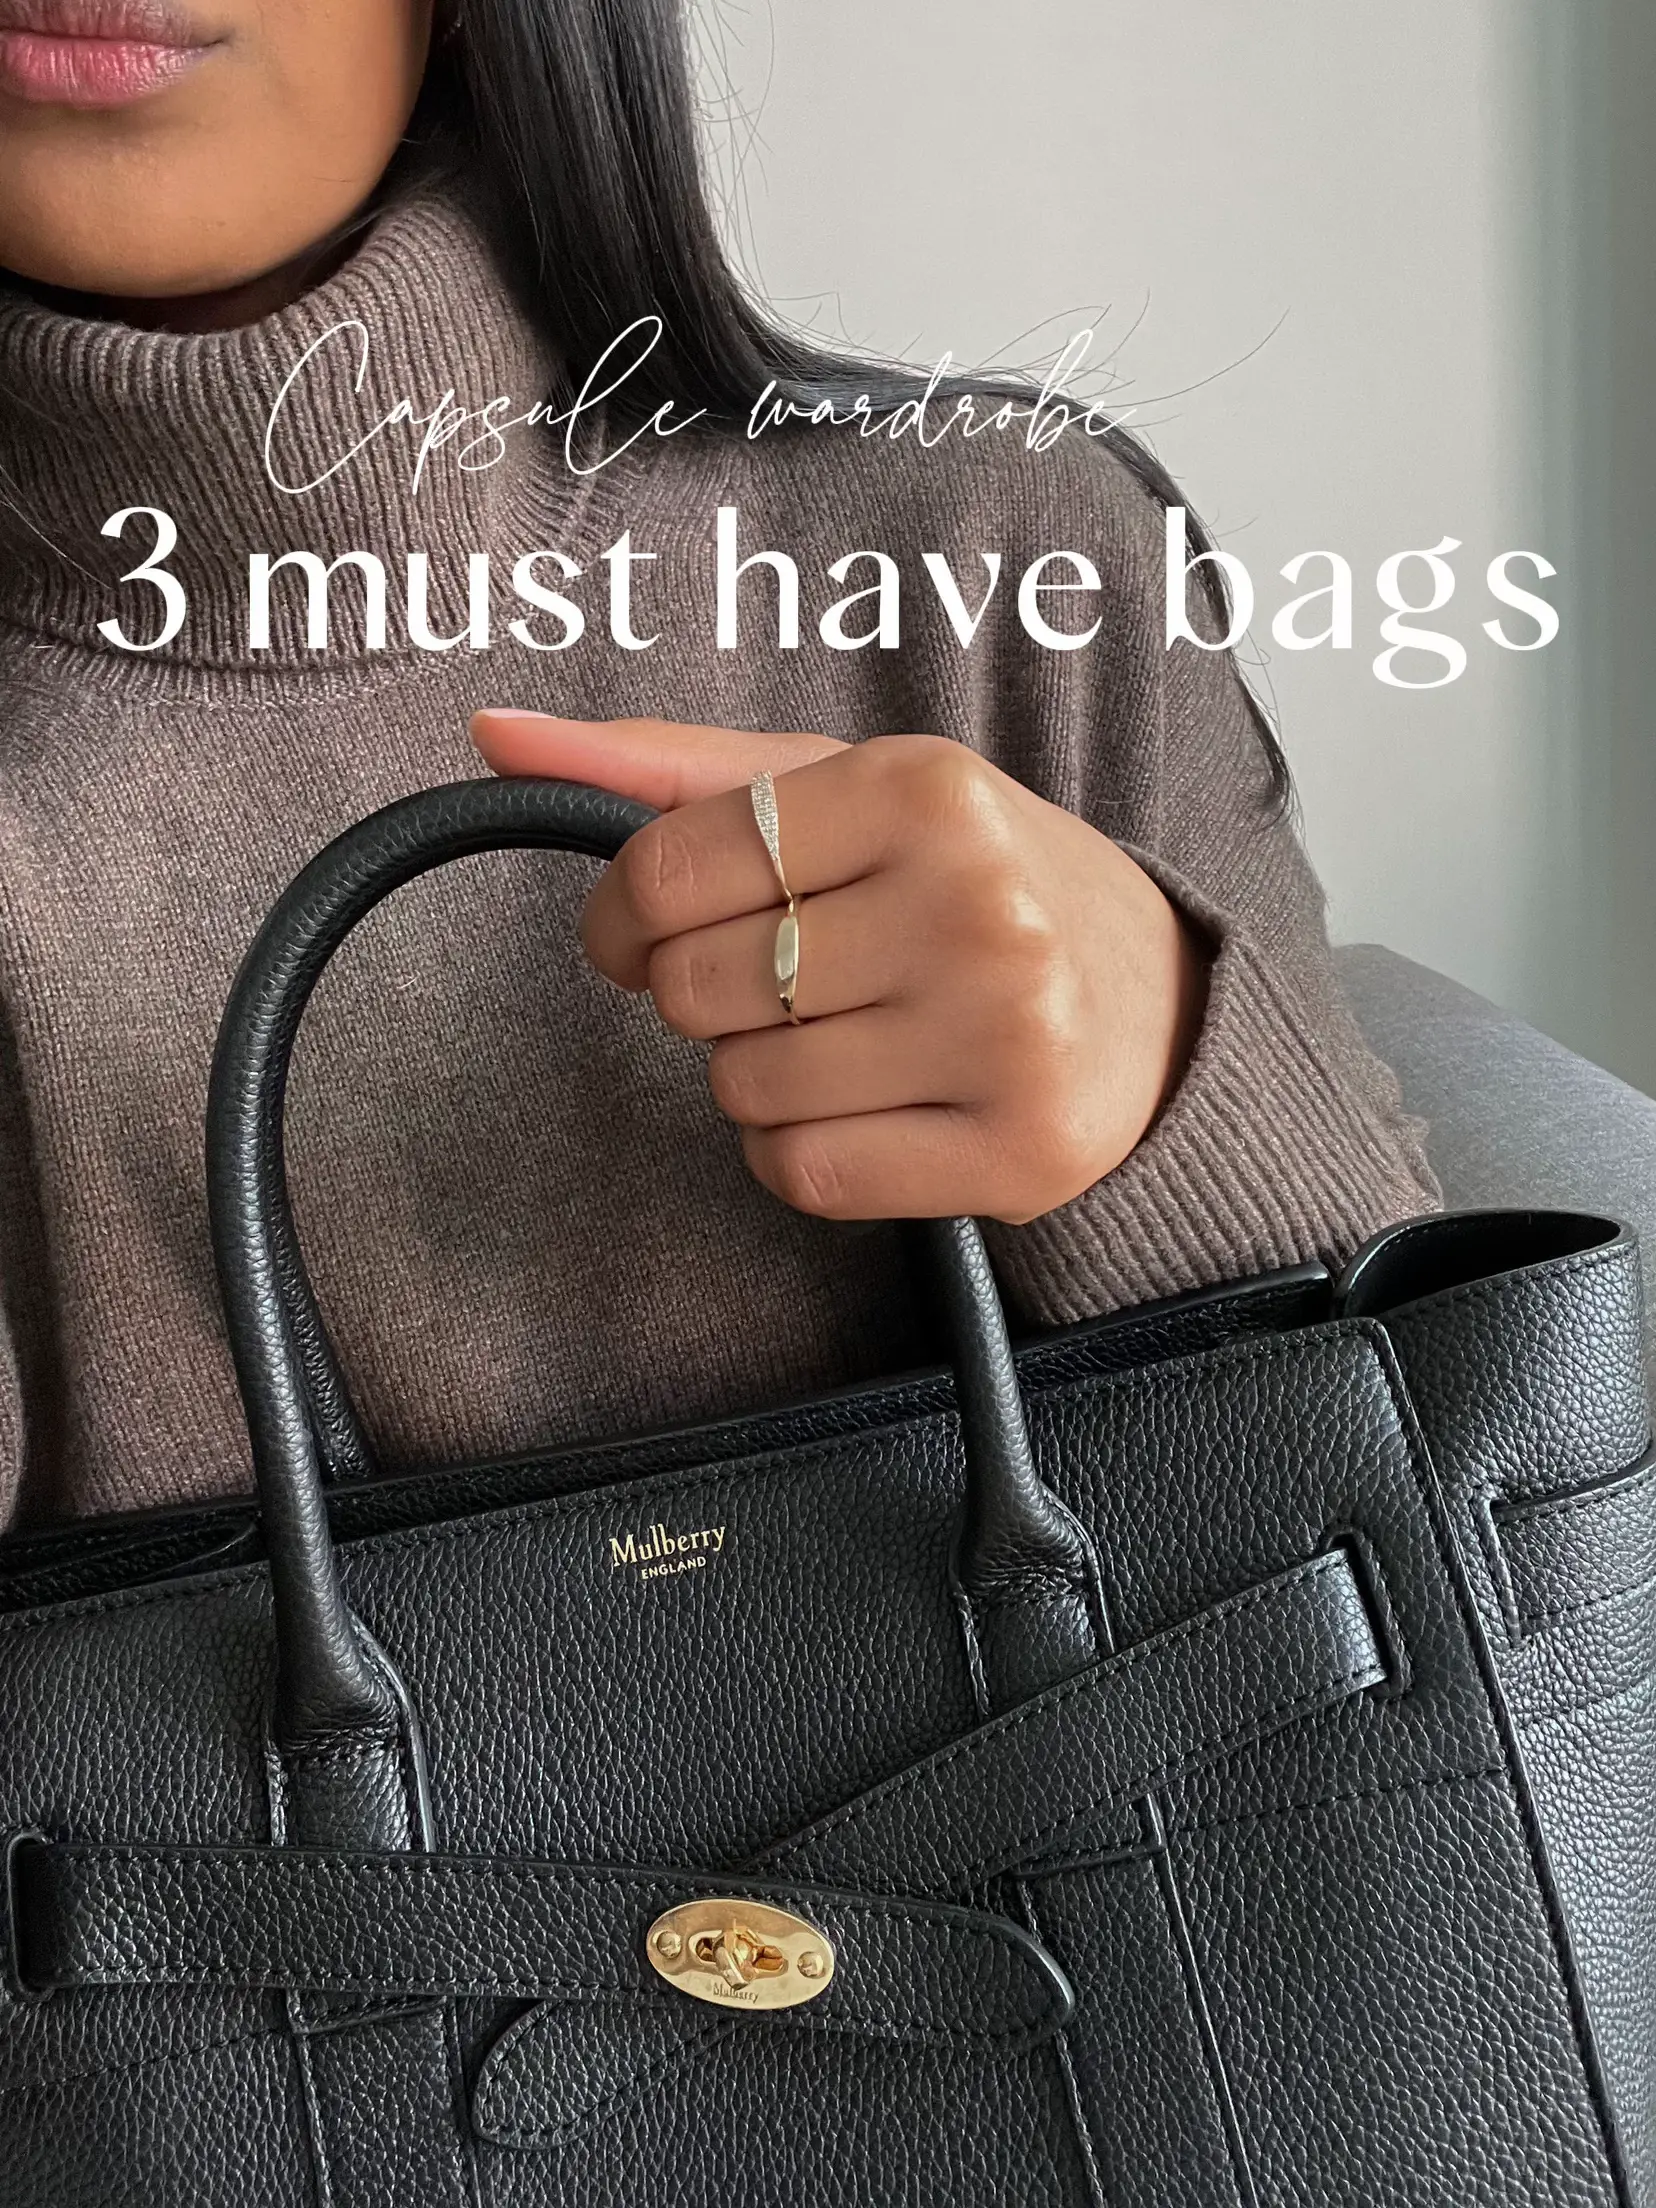 3 bags for a capsule wardrobe, Gallery posted by Kavveeta